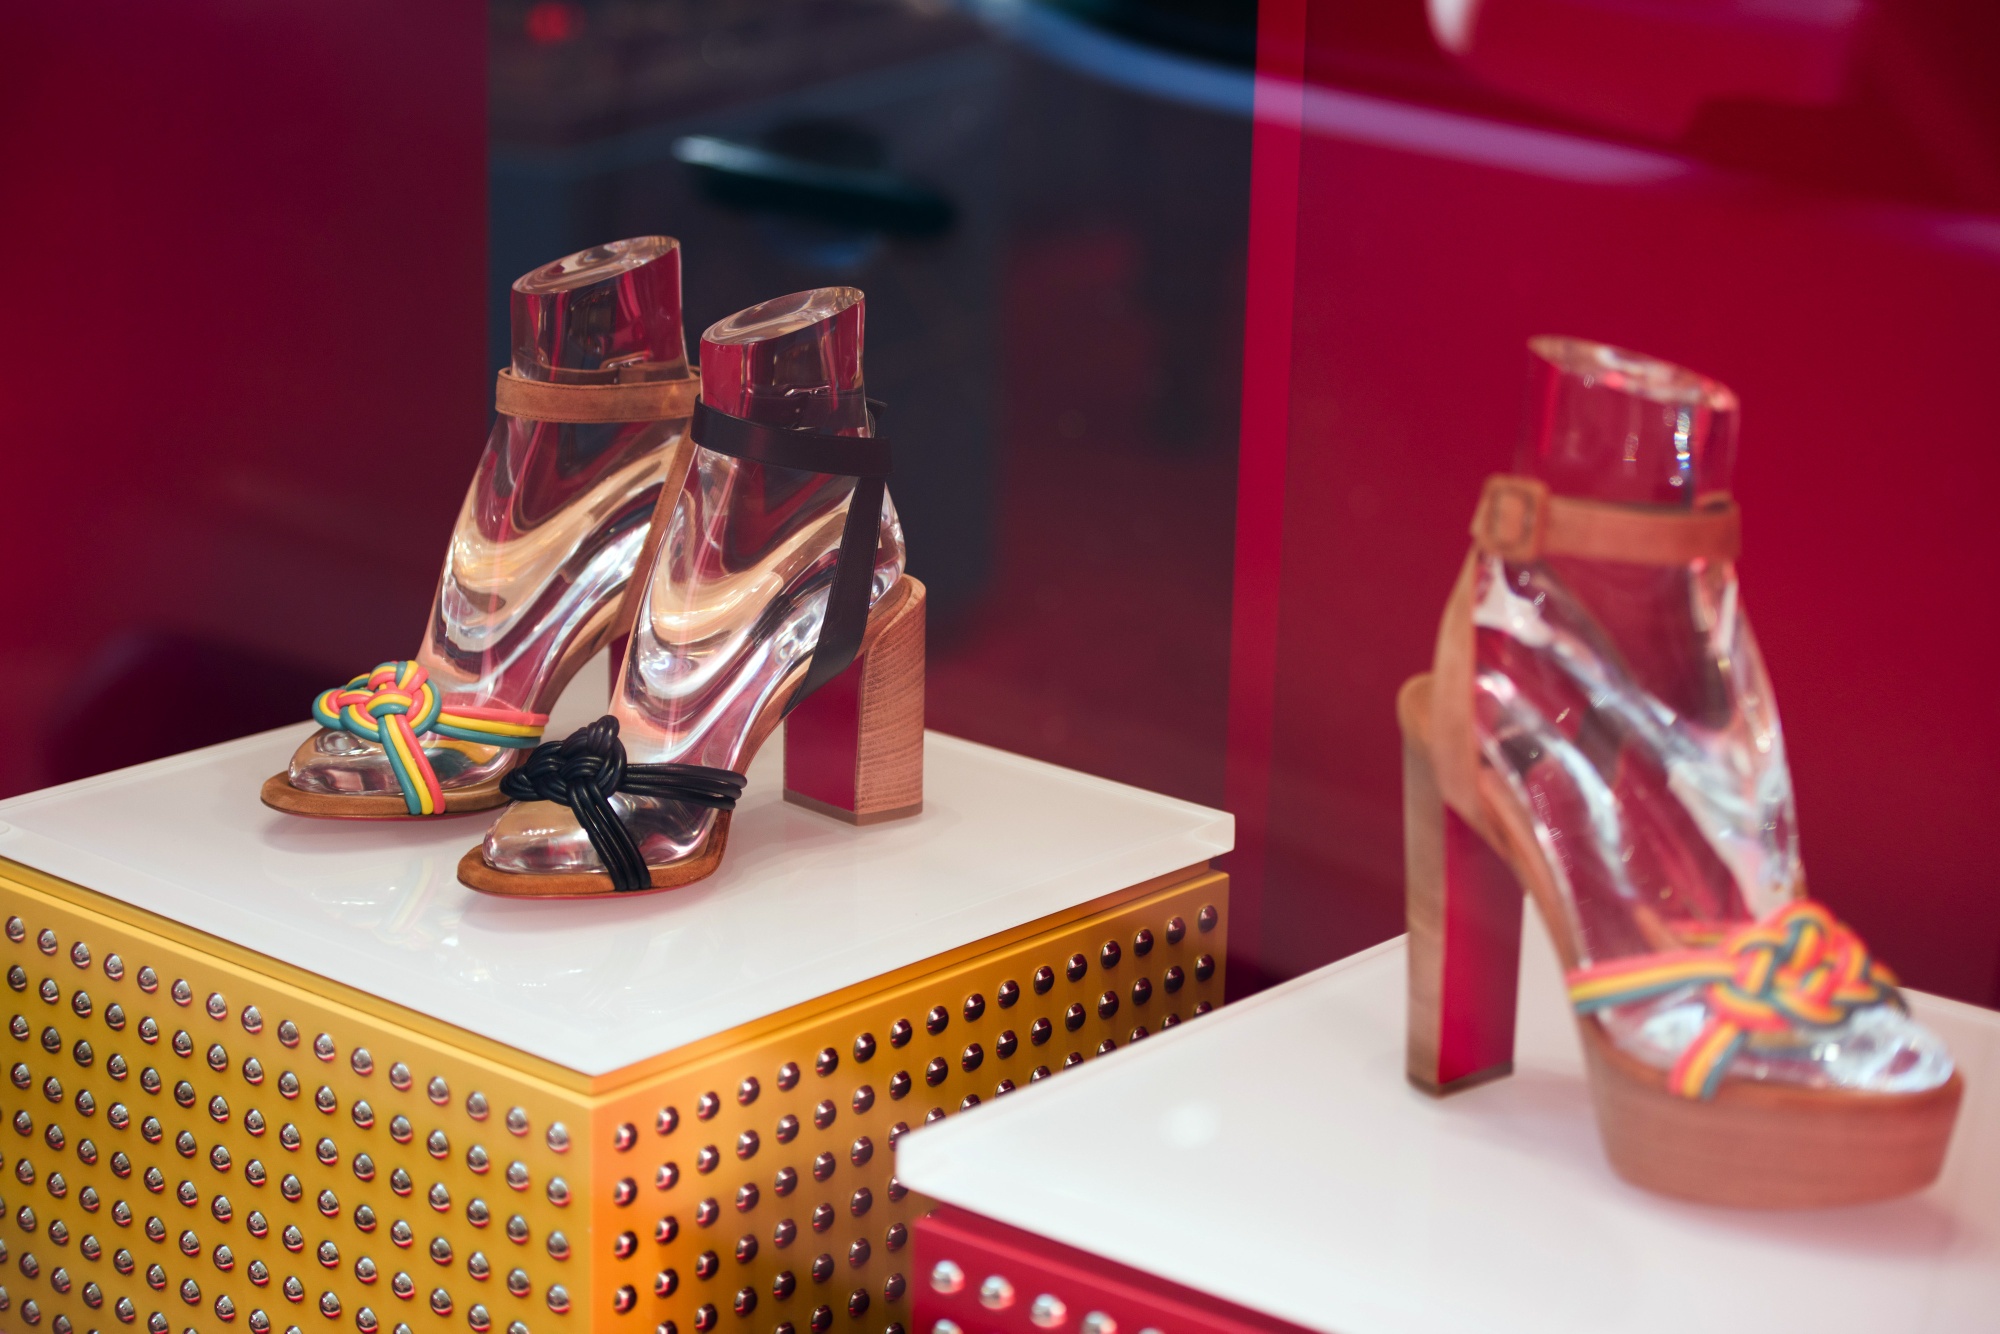 Christian Louboutin may lose trademark to red-soled shoes